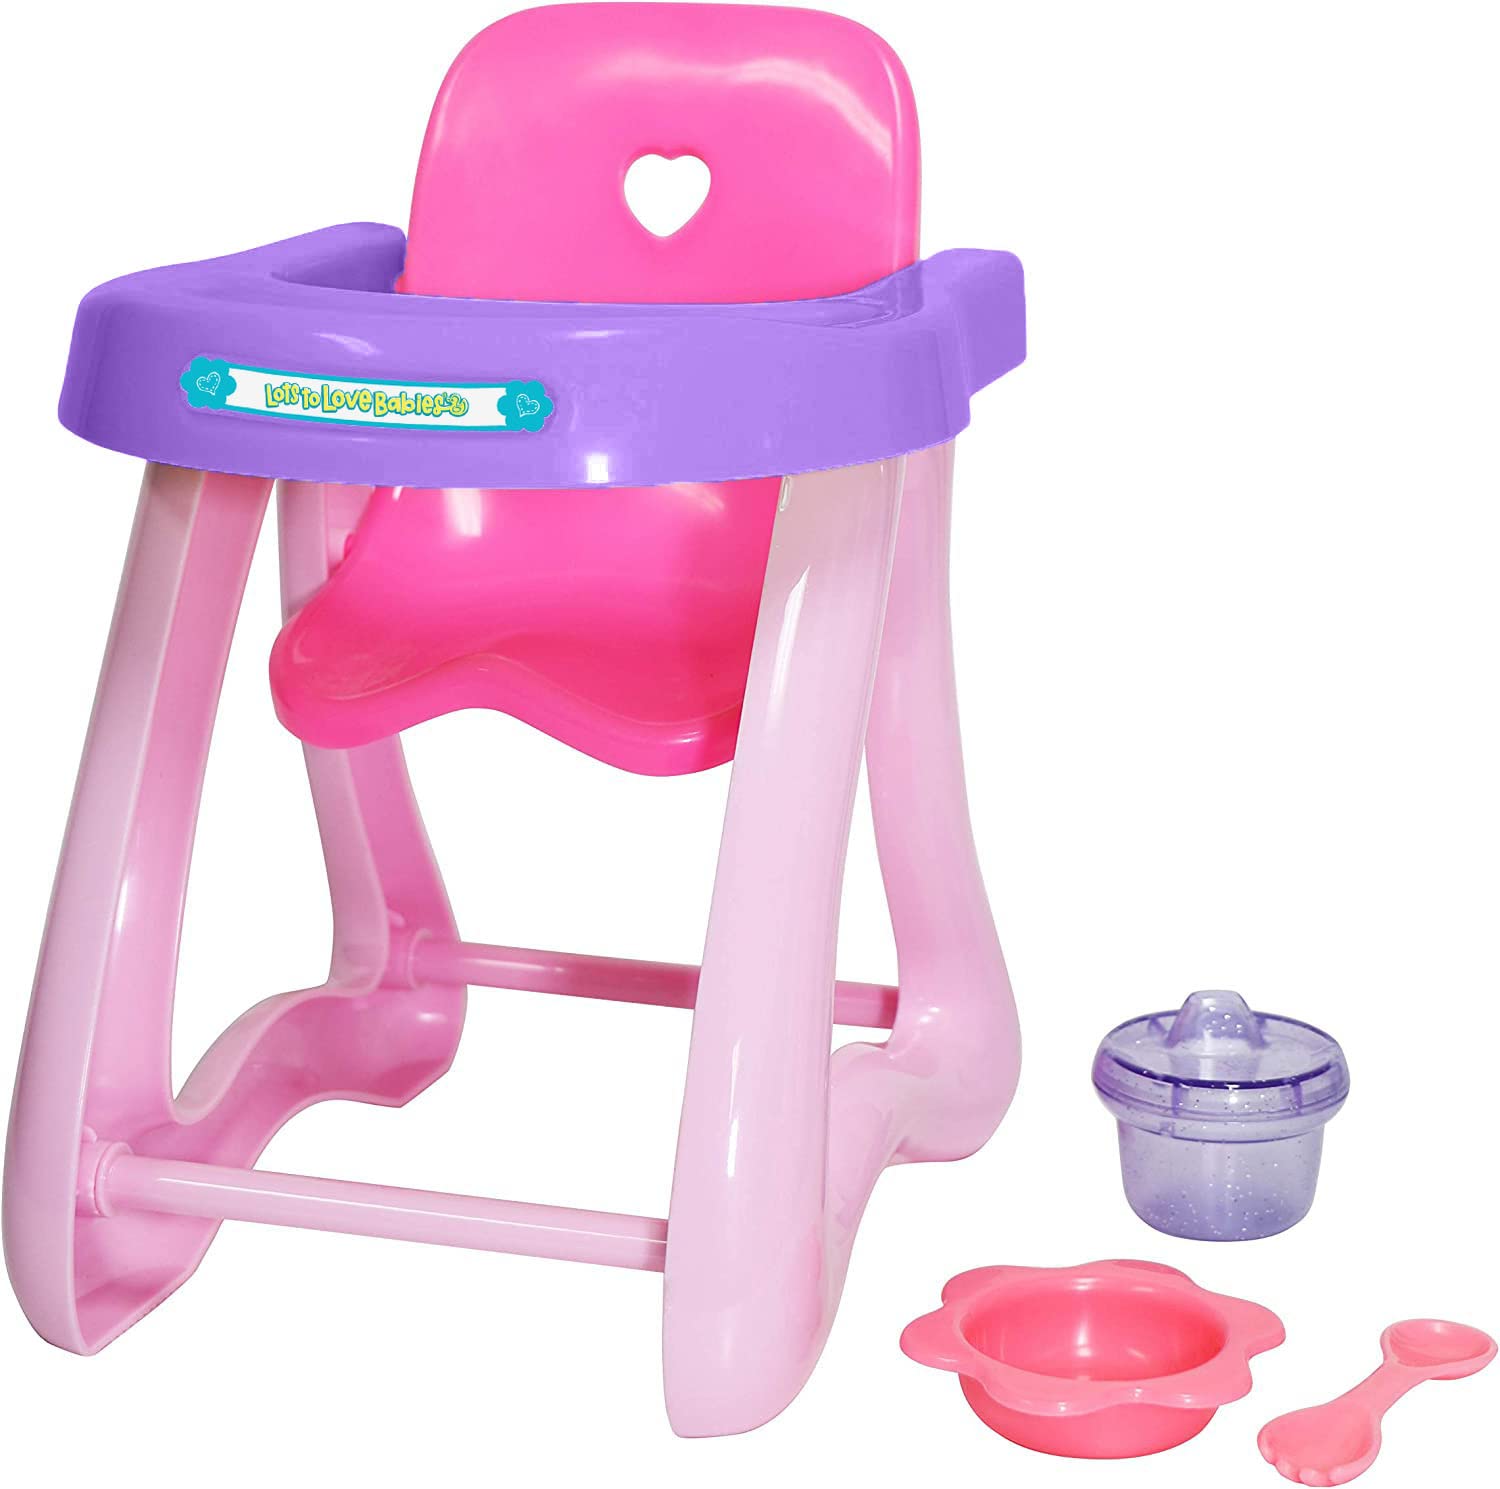 JC Toys Deluxe Doll Accessory Bundle | High Chair, Crib, Bath and Extra Accessories for Dolls up to 11